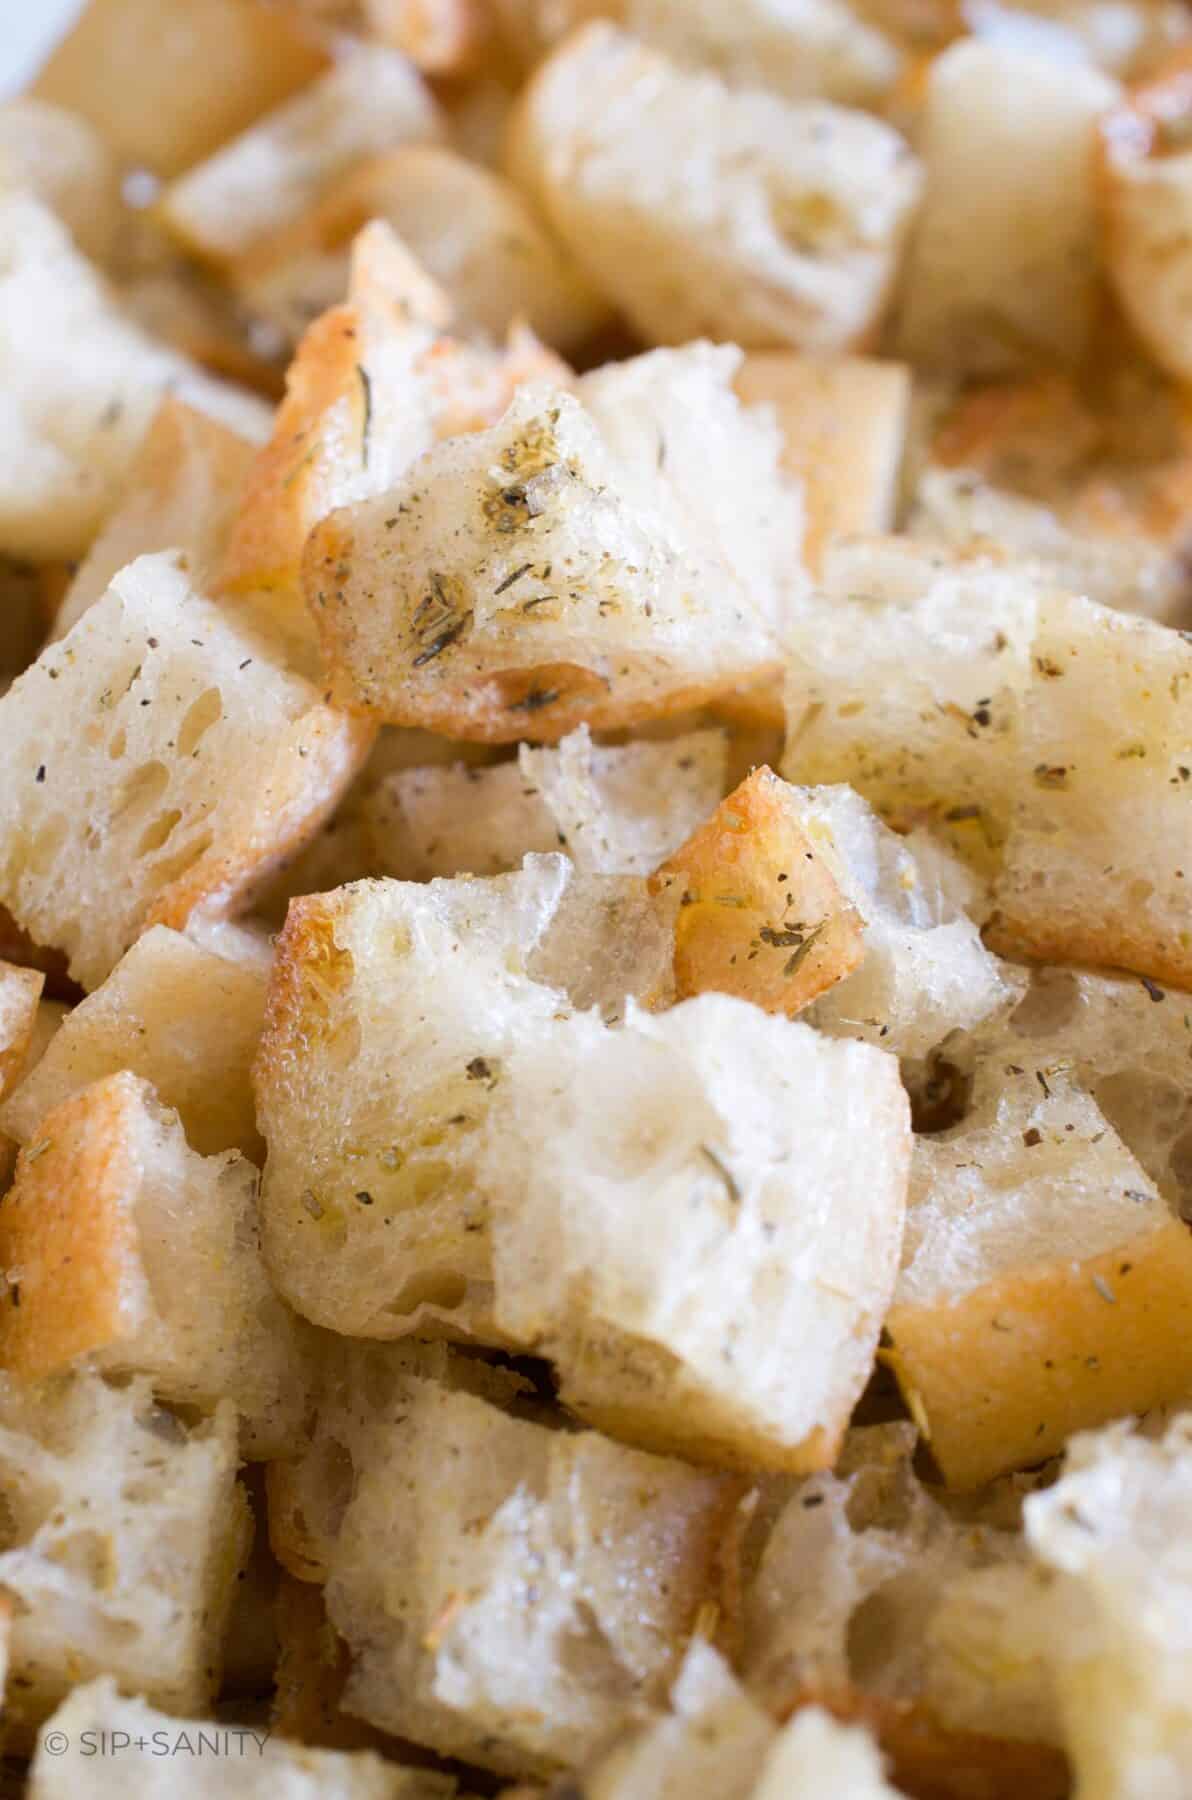 Close up of cubed bread pieces covered in olive oil and herb seasonings.